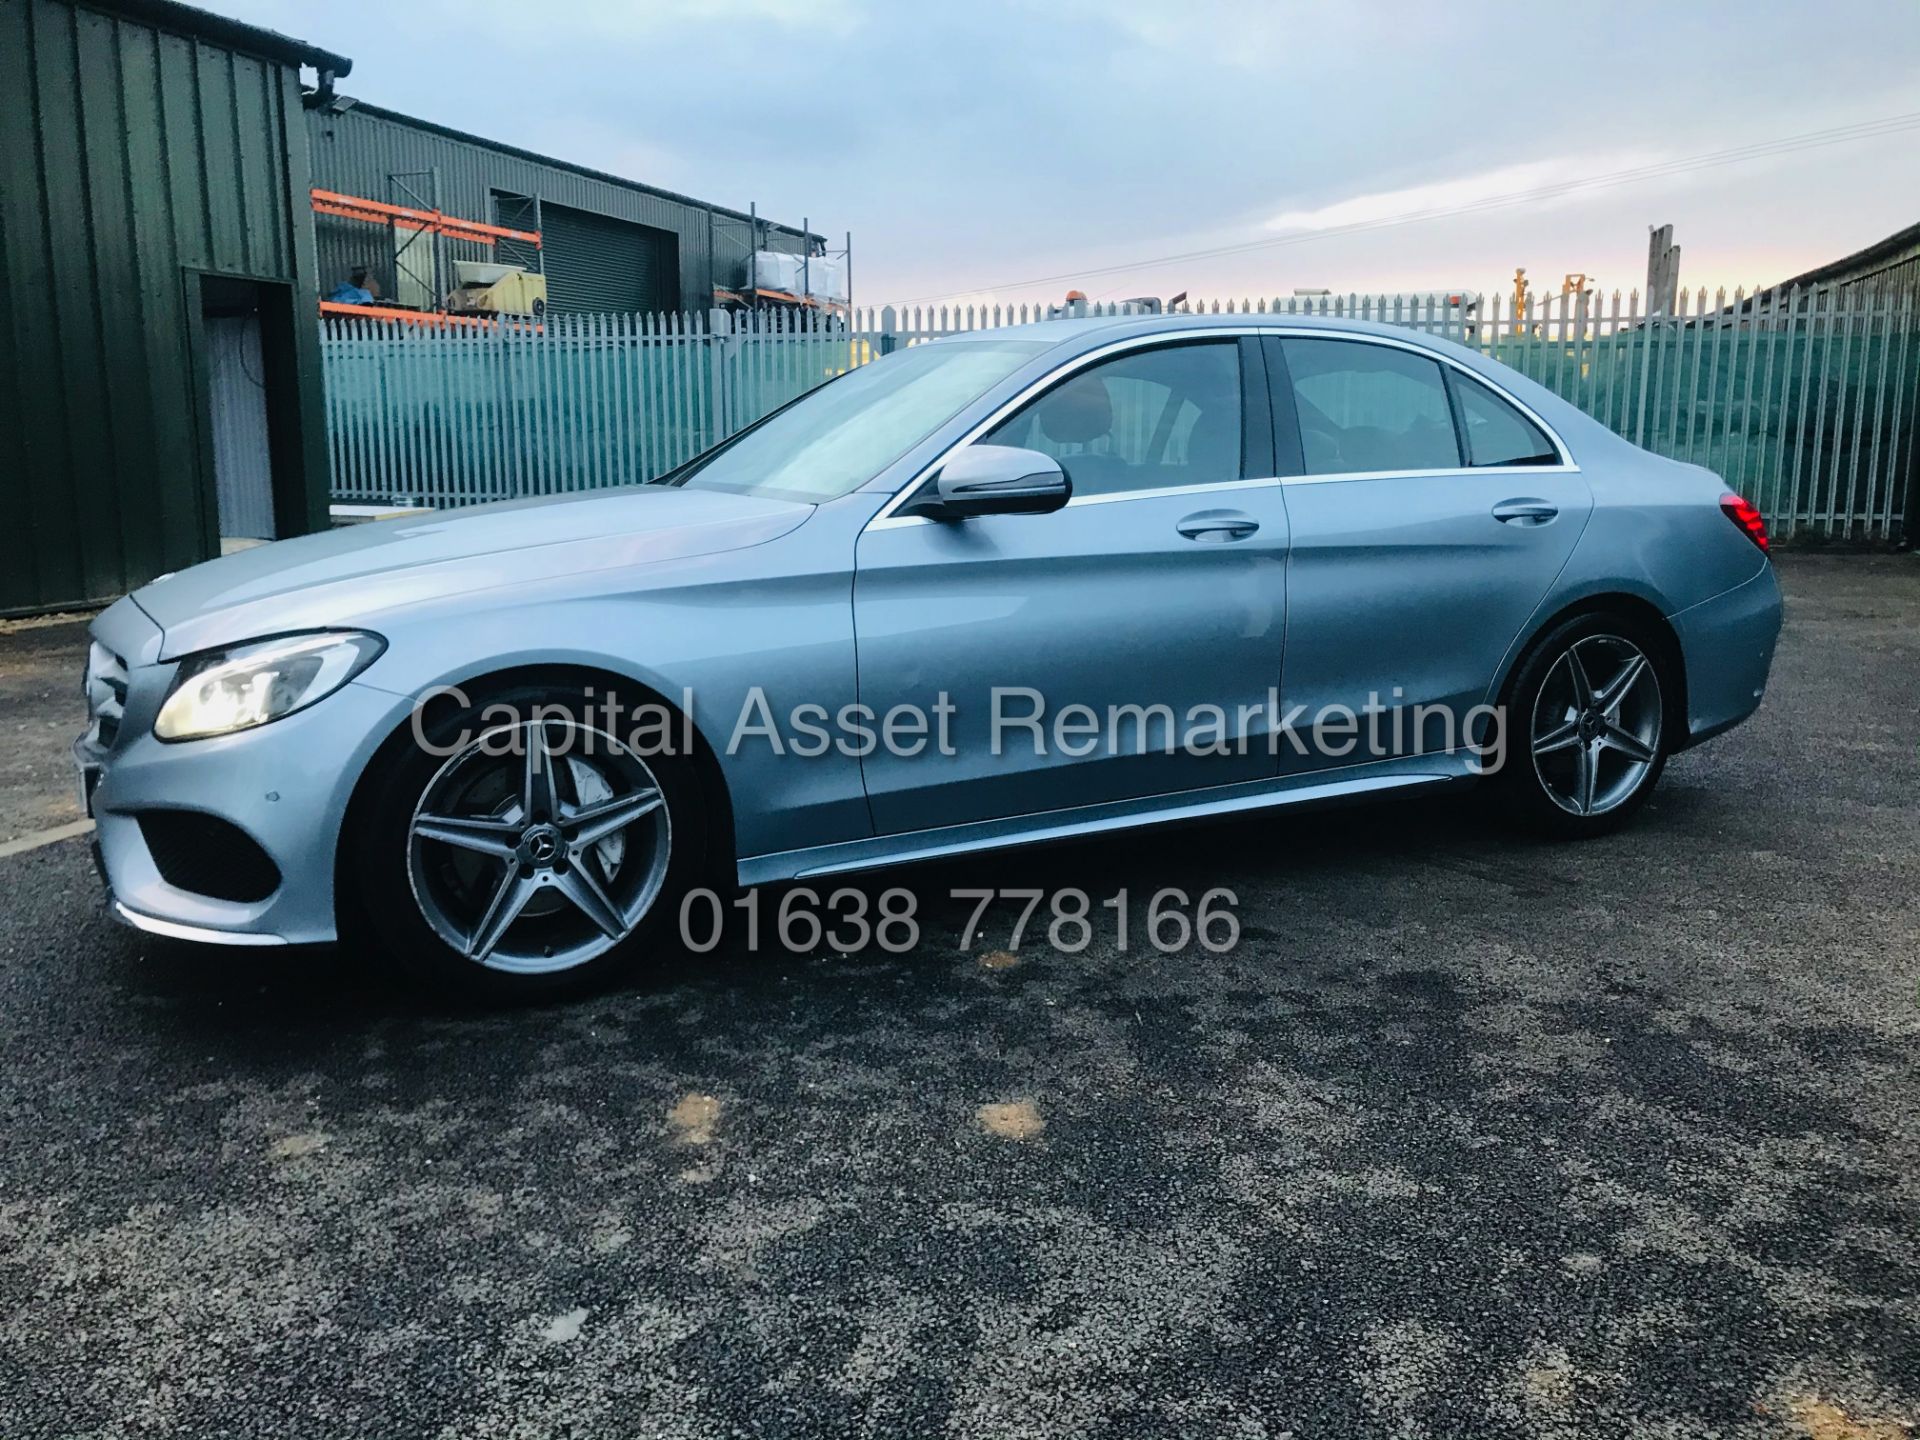 (ON SALE) MERCEDES C220d "AMG LINE" AUTOMATIC (18 REG) 1 OWNER - LEATHER - NAV - REAR CAMERA - Image 7 of 22